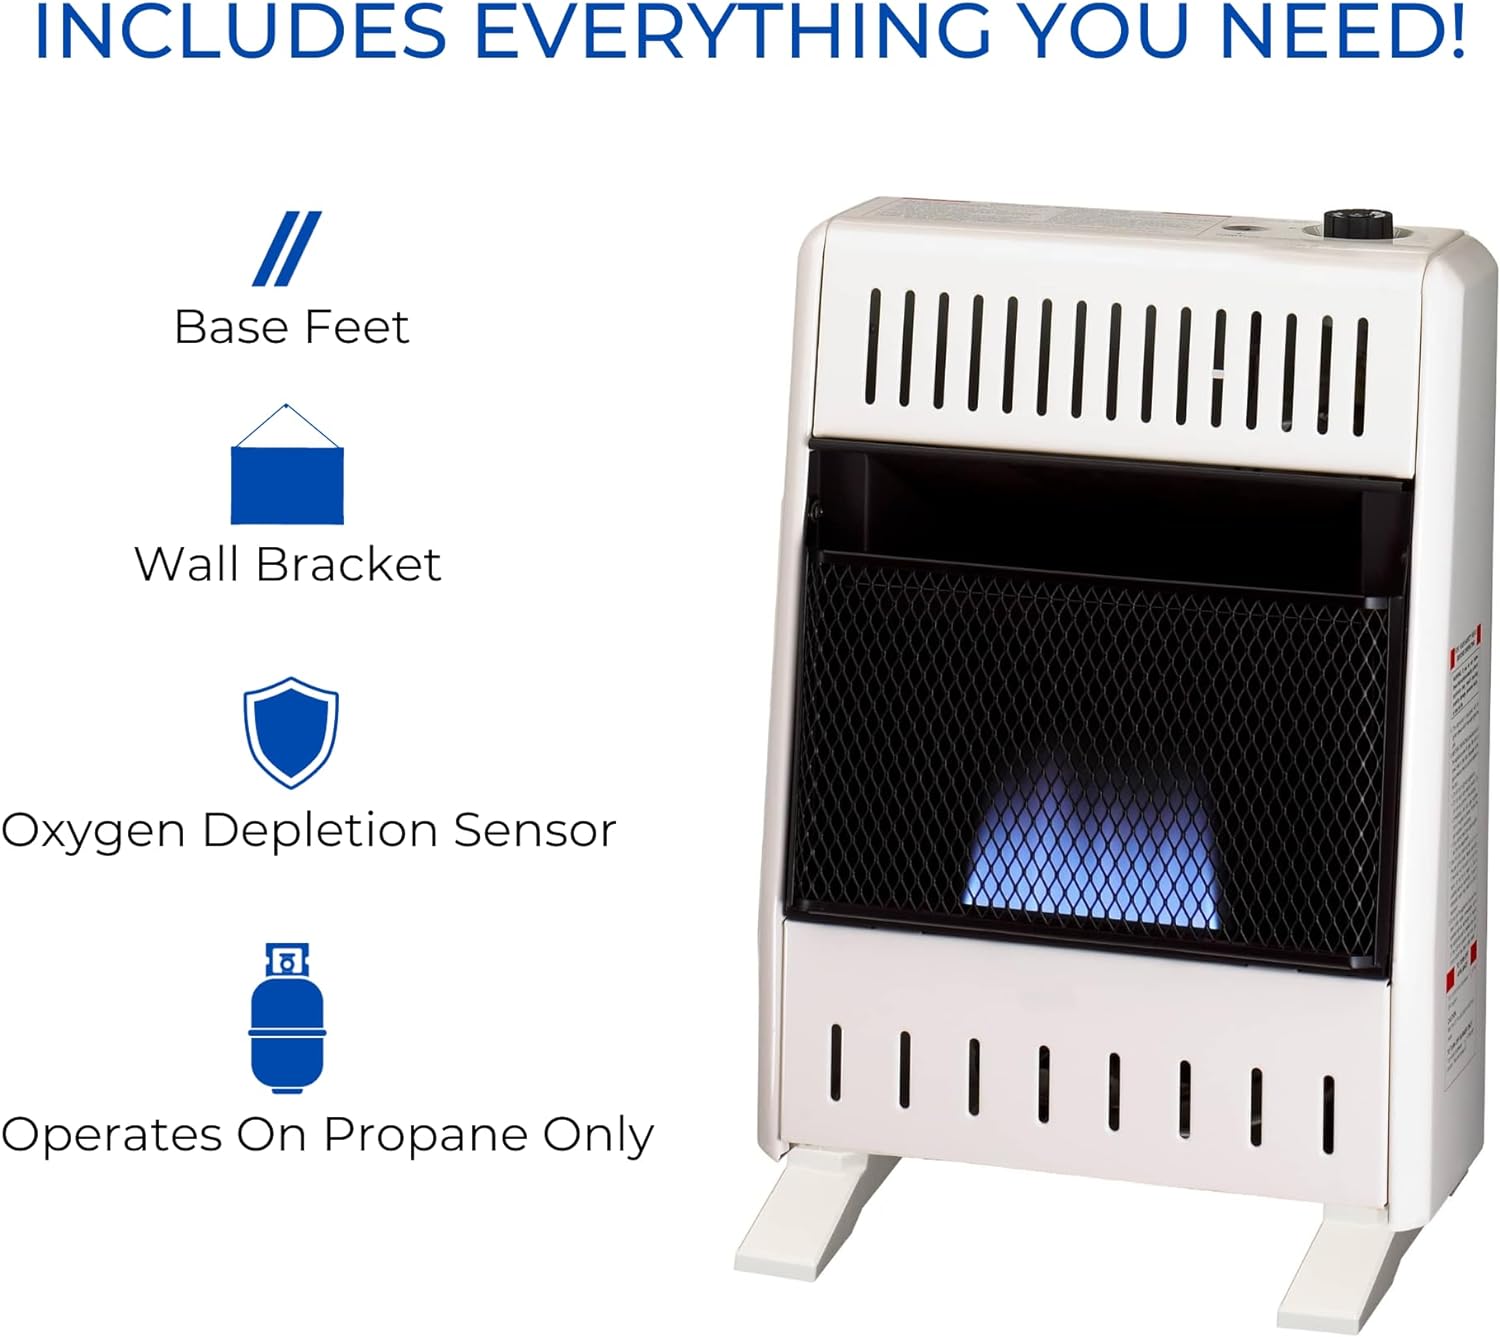 ProCom ML100TBA-B Ventless Propane Gas Blue Flame Space Heater with Thermostat Control for Home and Office Use, 10000 BTU, Heats Up to 500 Sq. Ft., Includes Wall Mount and Base Feet, White - ProCom ML100TBA-B Ventless Propane Gas Blue Flame Space Heater Review